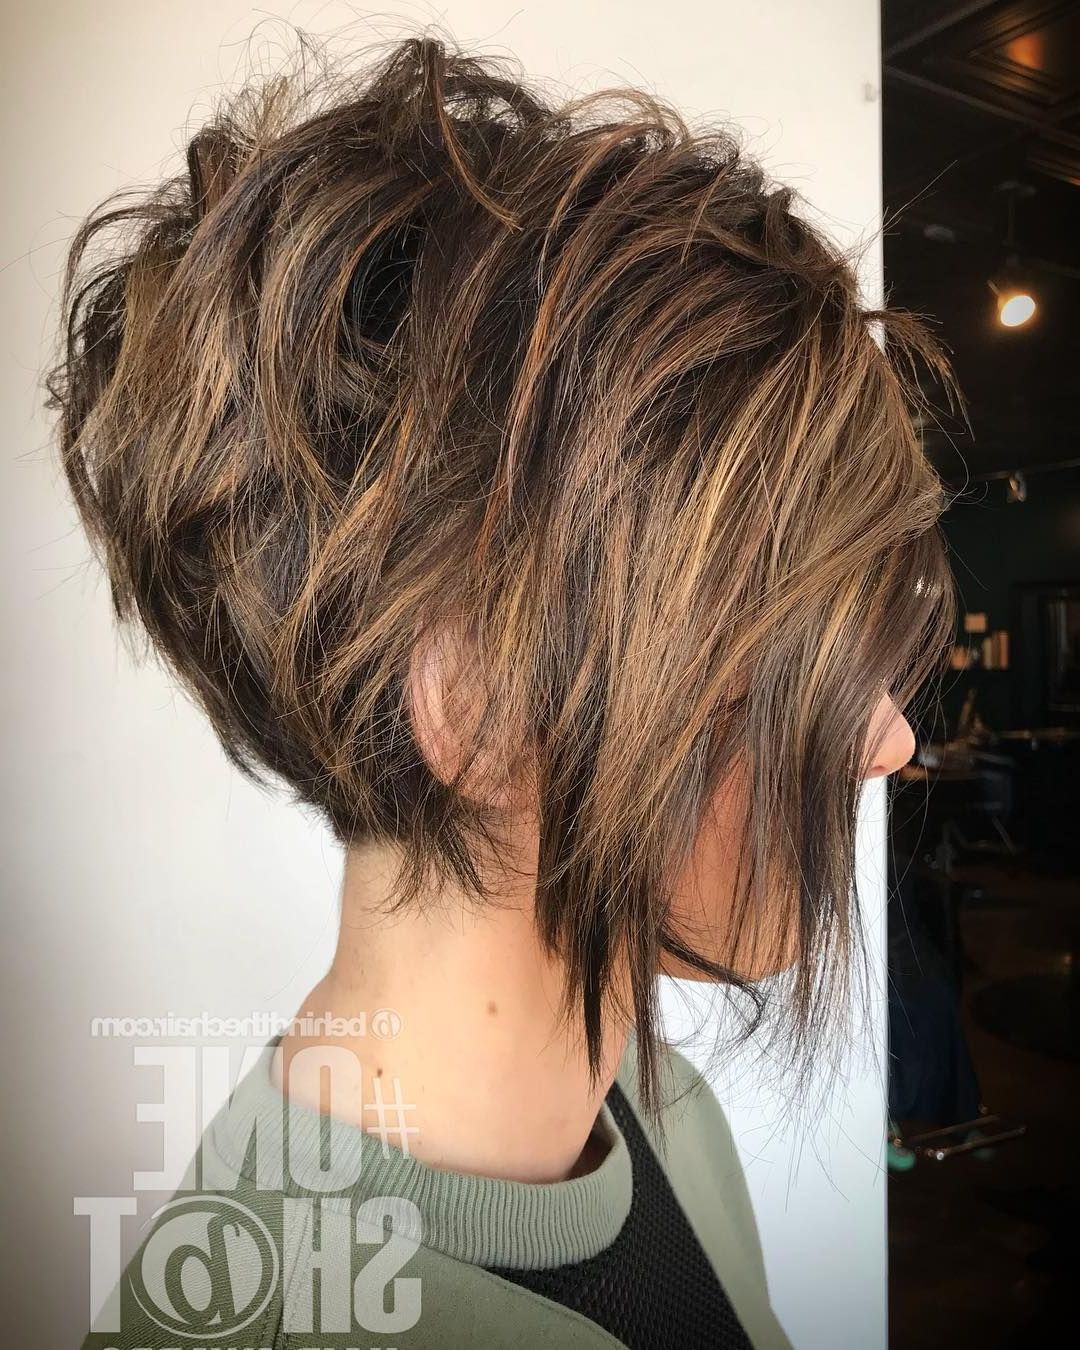 10 Trendy Messy Bob Hairstyles And Haircuts, 2019 Female Short Hair In Current Short Messy Bob Hairstyles (View 1 of 20)